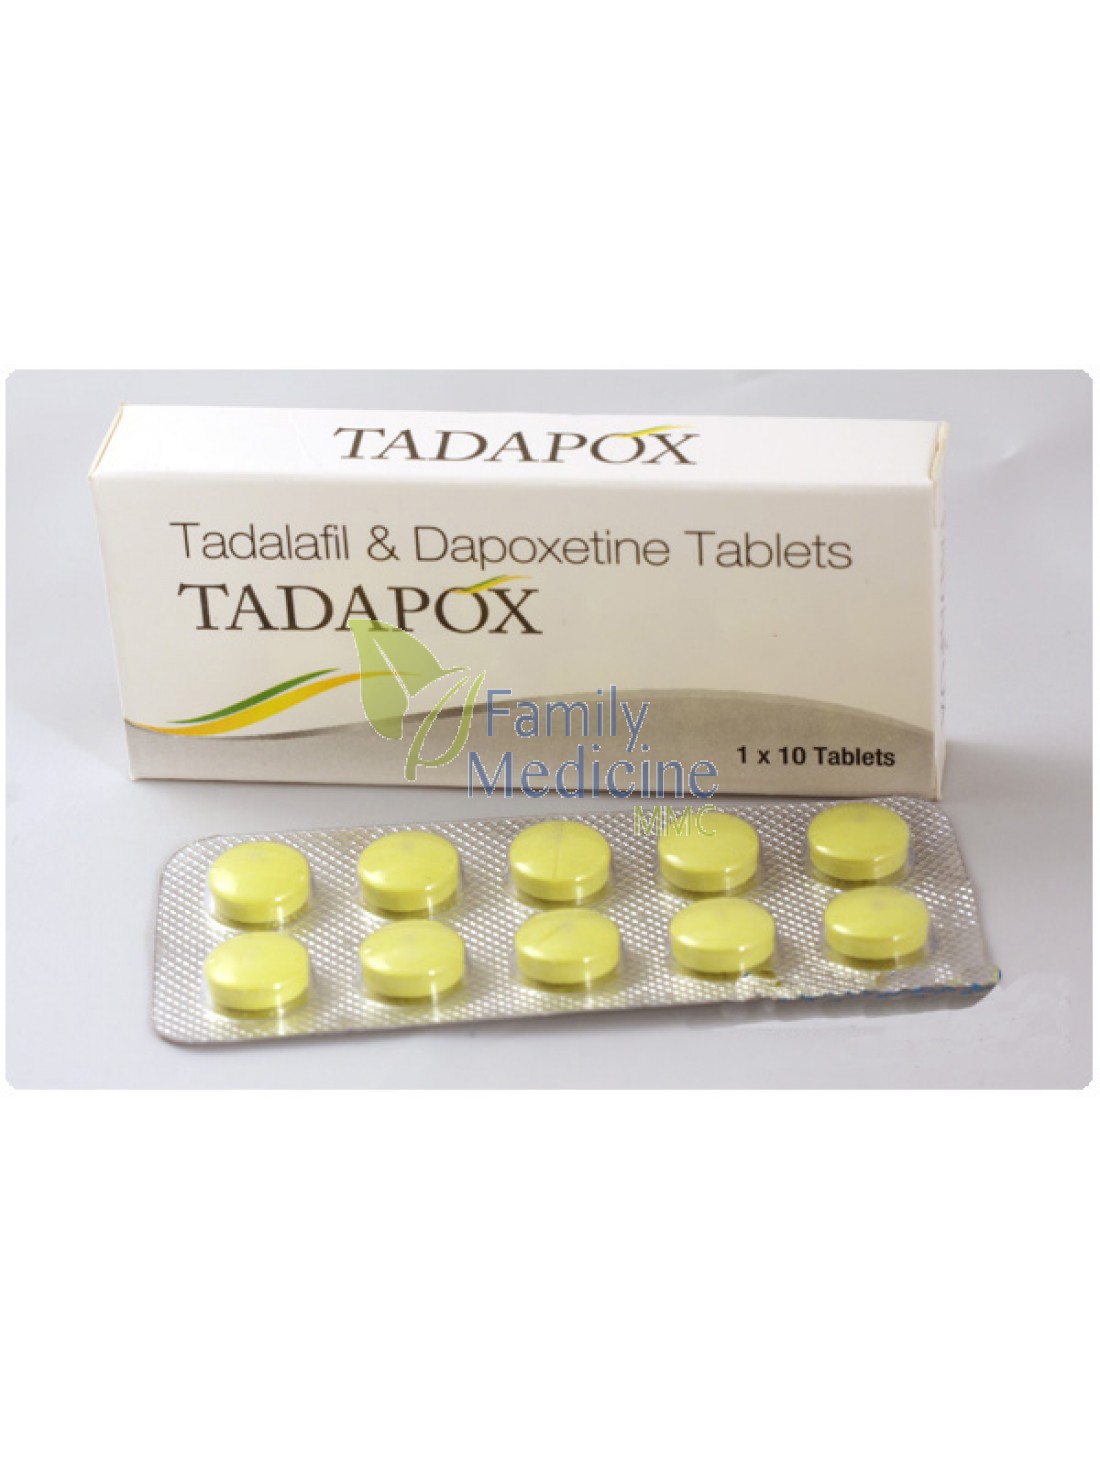 dapoxetine tablets price in india